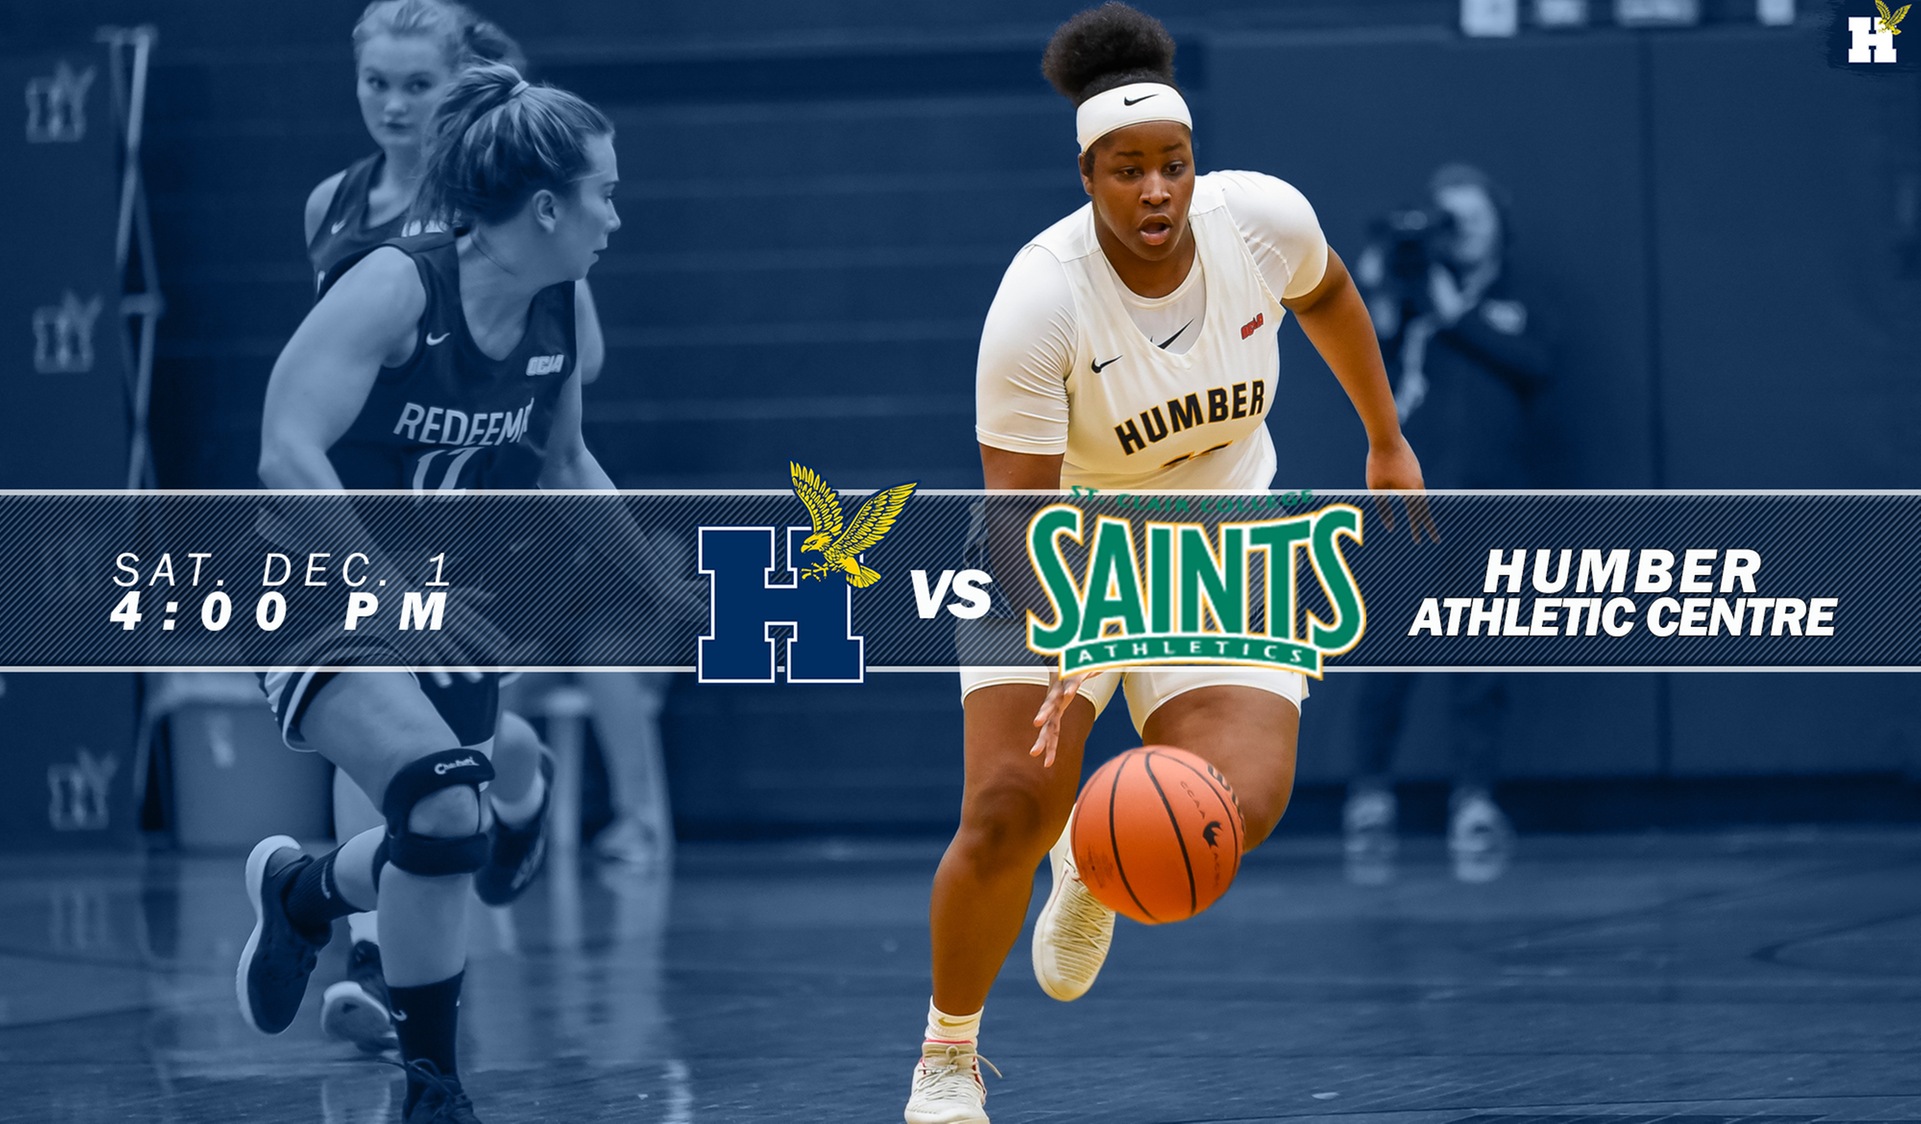 No. 11 WOMEN'S BASKETBALL CONCLUDES FIRST-HALF SATURDAY AGAINST ST. CLAIR